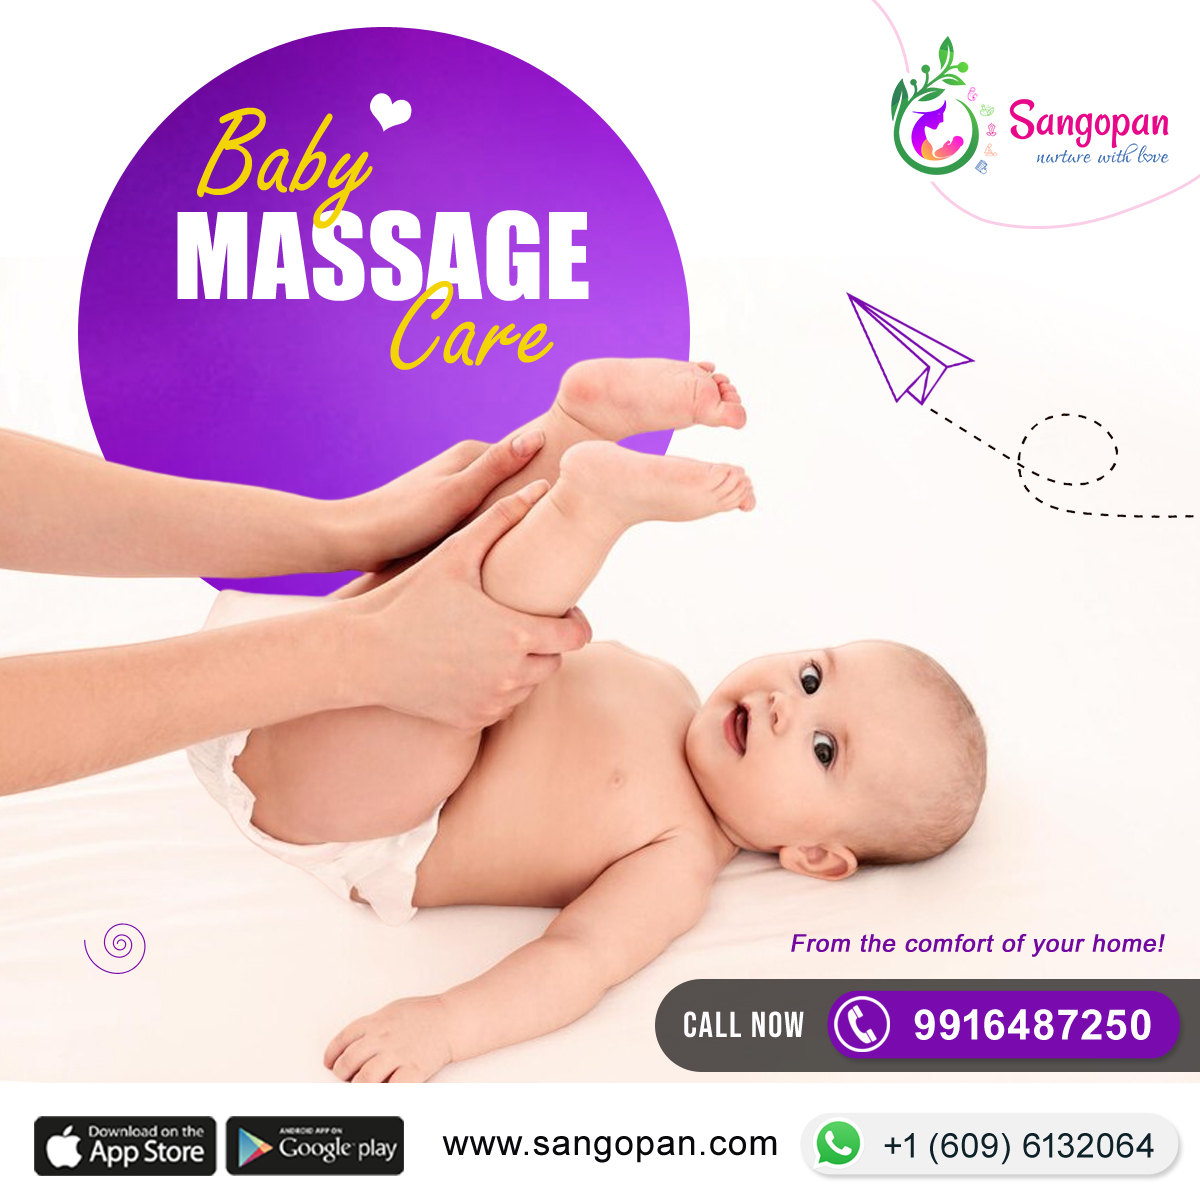 Baby Massage Care Package by Sangopan, from the comfort of your home! sangopan.com/products/baby-… #sangopan #mothercare #mother #babycare #massage #Babymassage #pregnancyhealth #yoga #pranayama #pregnancy #pregnancyjourney #pregnancymassage #baby #mom #workingmom #momlife #india